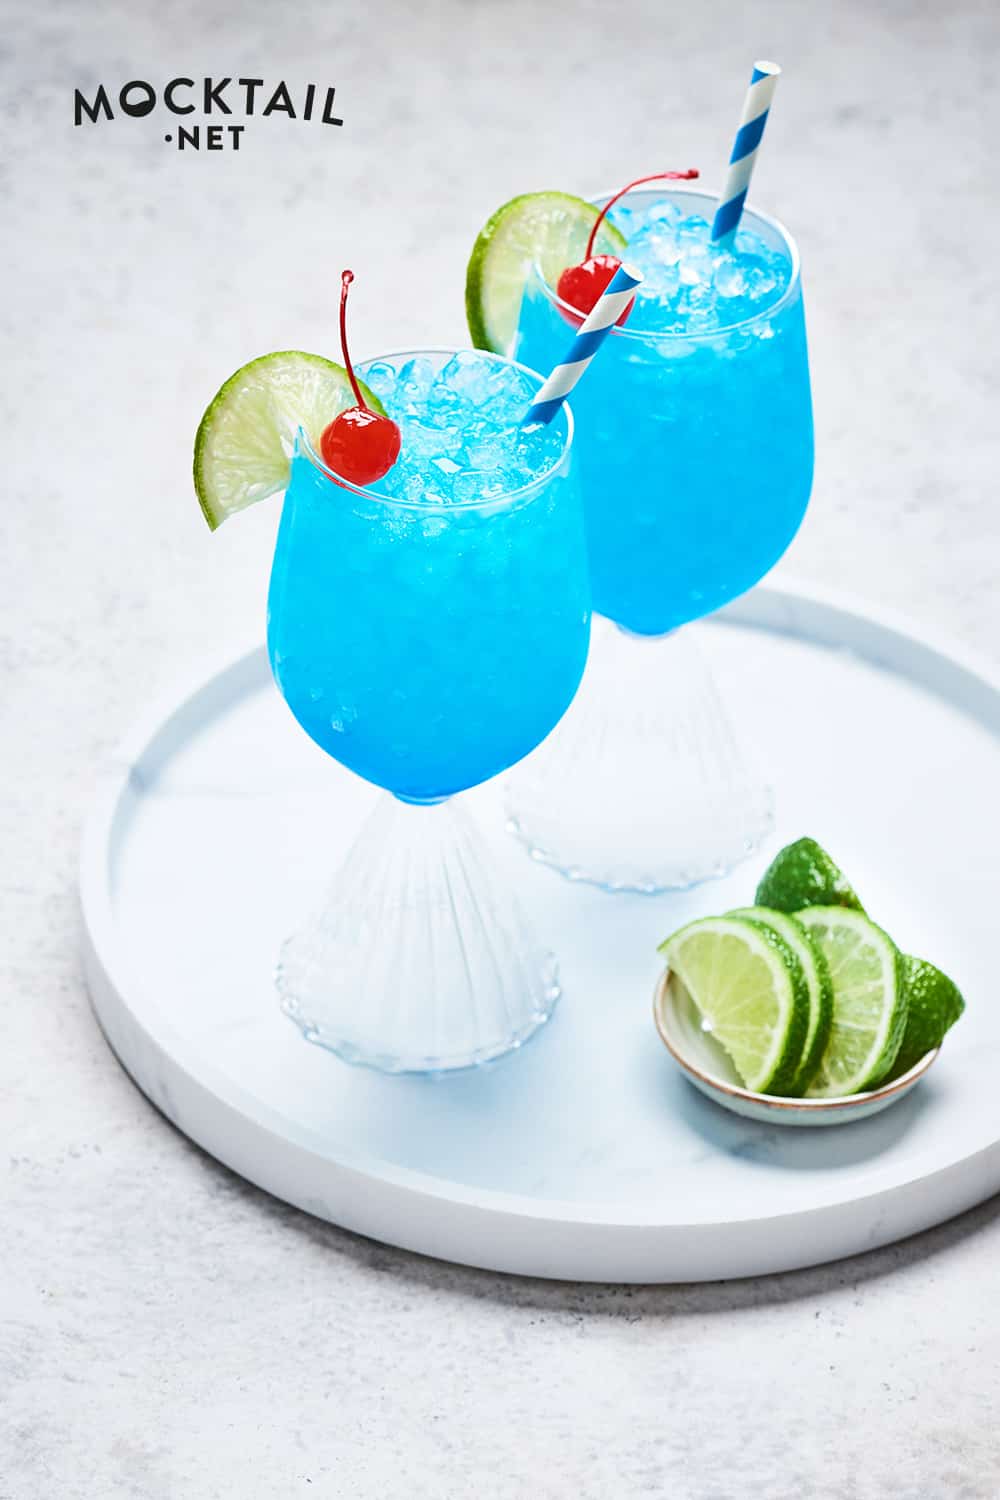 How to Make Non Alcoholic Long Island Iced Tea with Blue Curacao Syrup